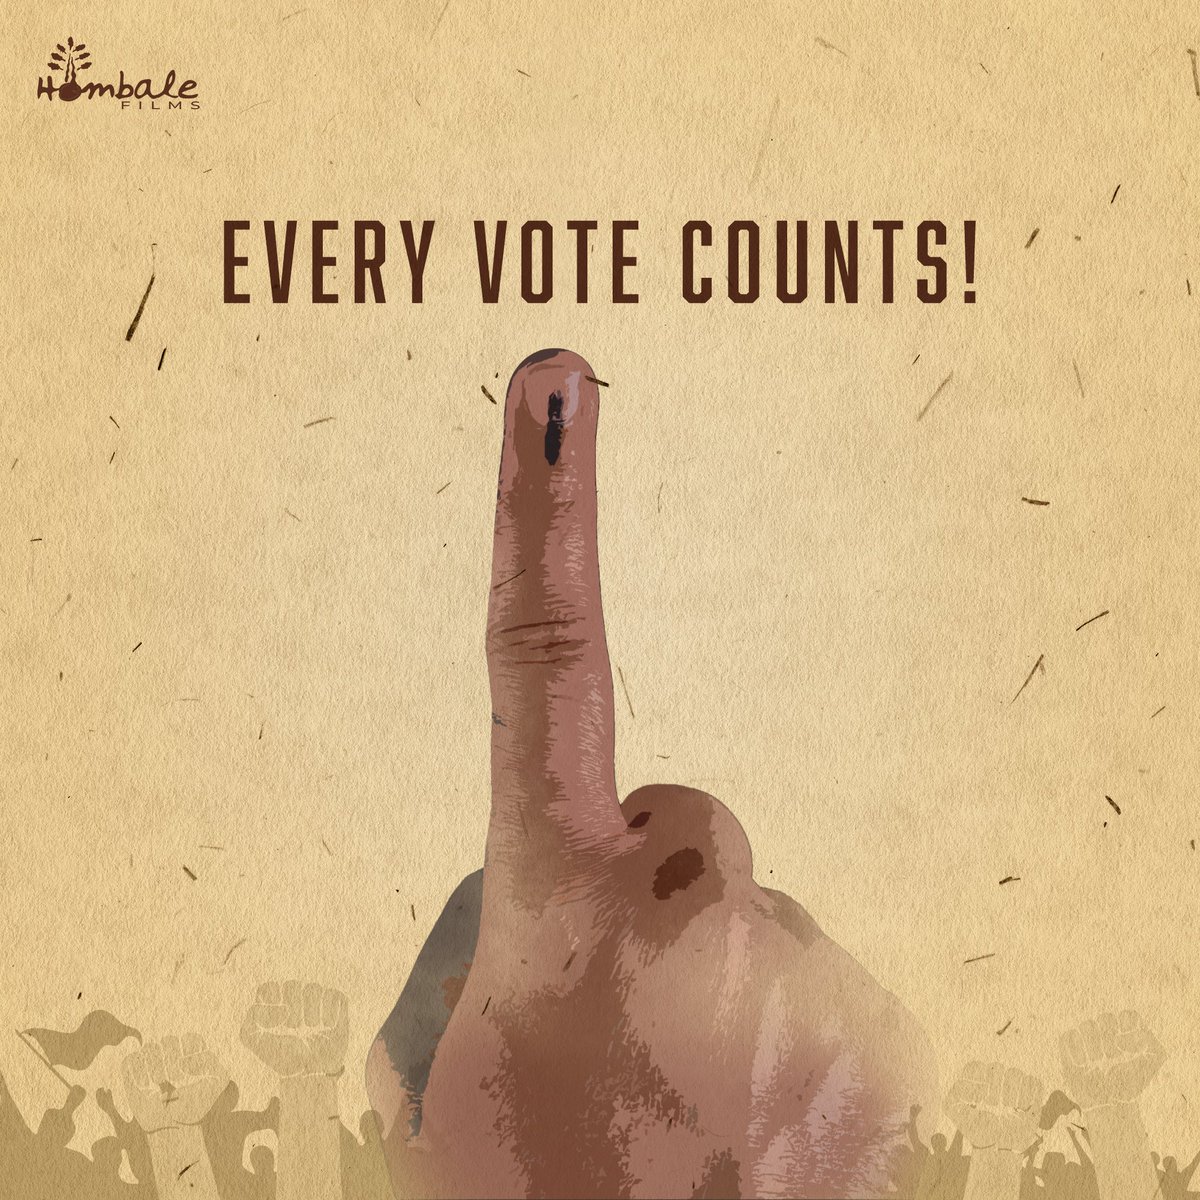 Get ready to make your mark! Election day is just around the corner. Every vote counts and matters in a democracy. Let’s show up, vote and make a difference together for a better future and development. #EveryVoteCounts #GeneralElections2024 #LokSabhaElections2024